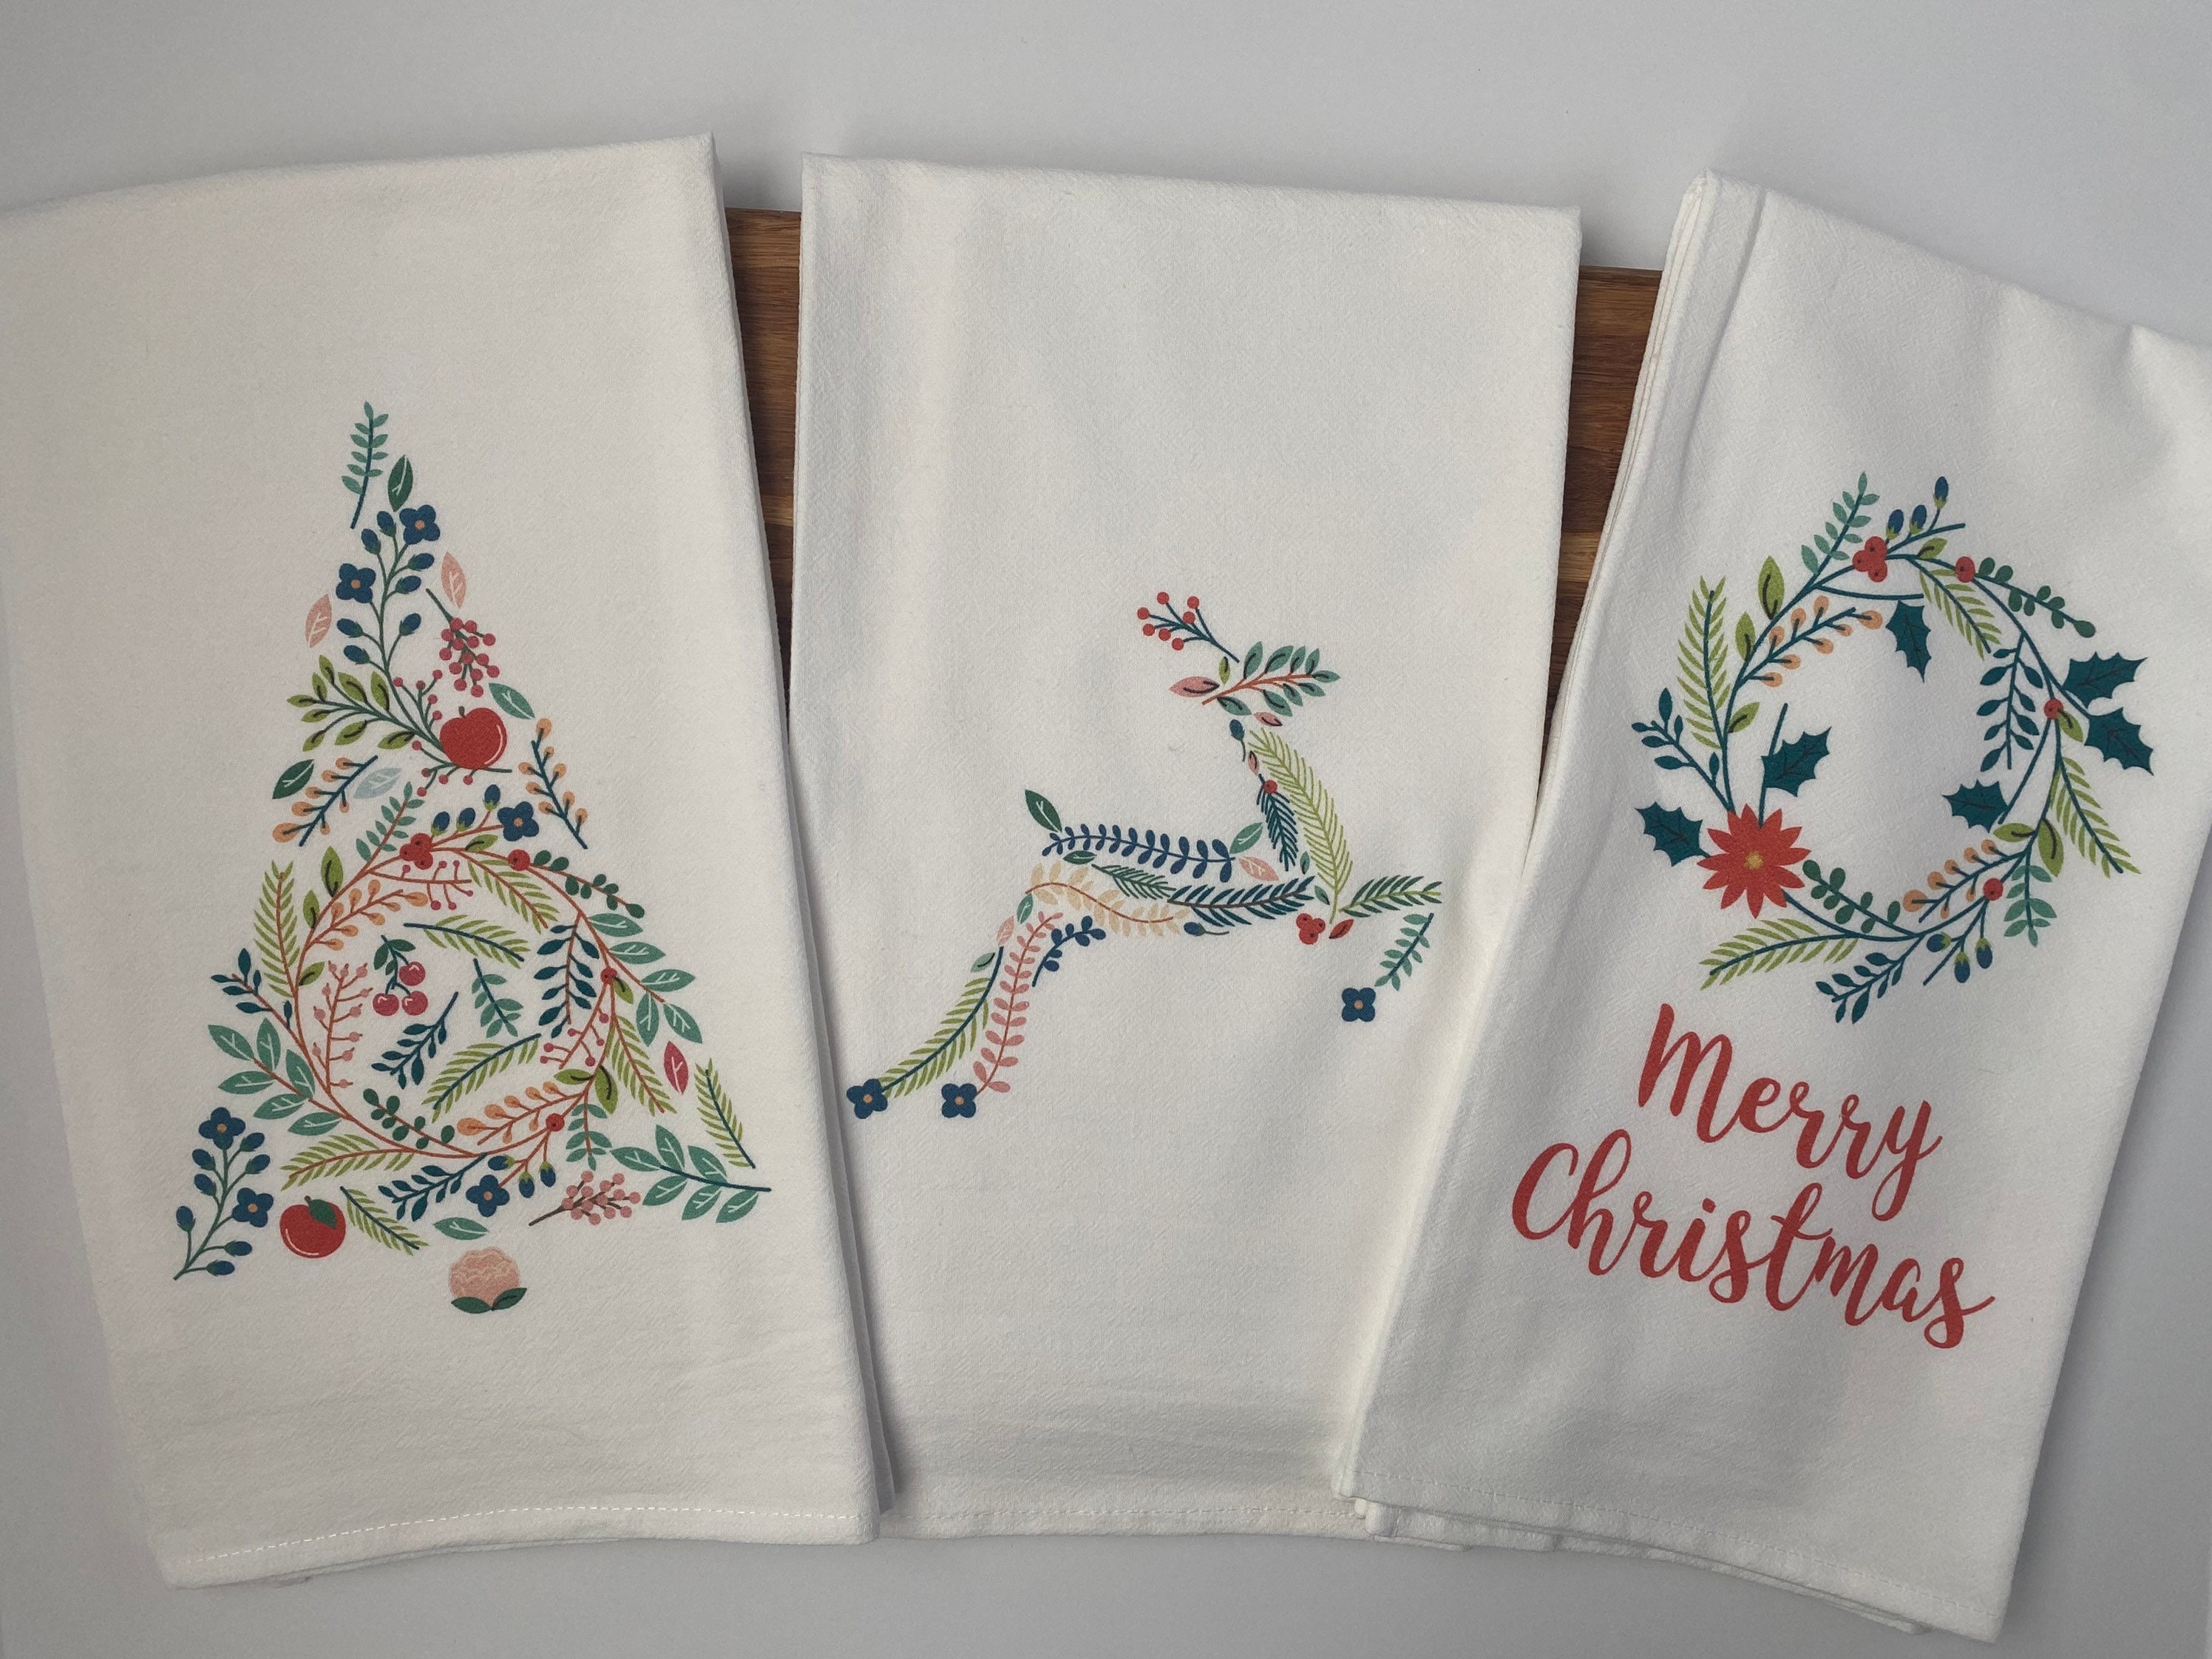  Lavien Home Christmas Kitchen Towels Embroidered, Cotton  Dishcloths Decoration for Xmas with Plaid (Set of 4), Waffle Weave Cute  Tree, Santa, Bell, Deer, 16 x 23 inches : Home & Kitchen